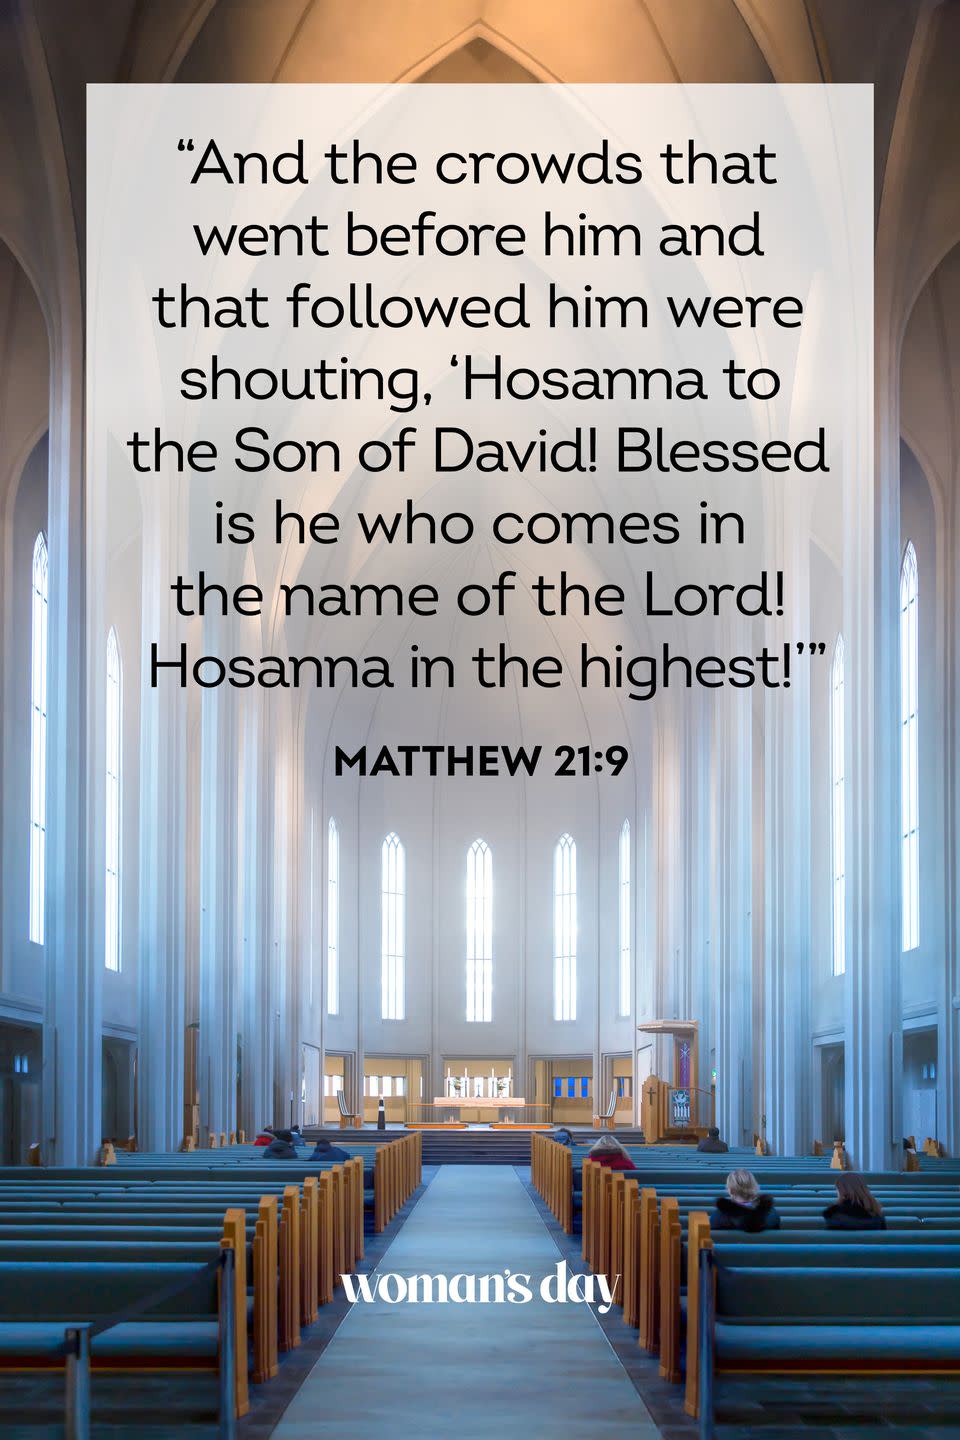 <p>"And the crowds that went before him and that followed him were shouting, 'Hosanna to the Song of David! Blessed is he who comes in the name of the Lord! Hosanna in the highest!'"</p>